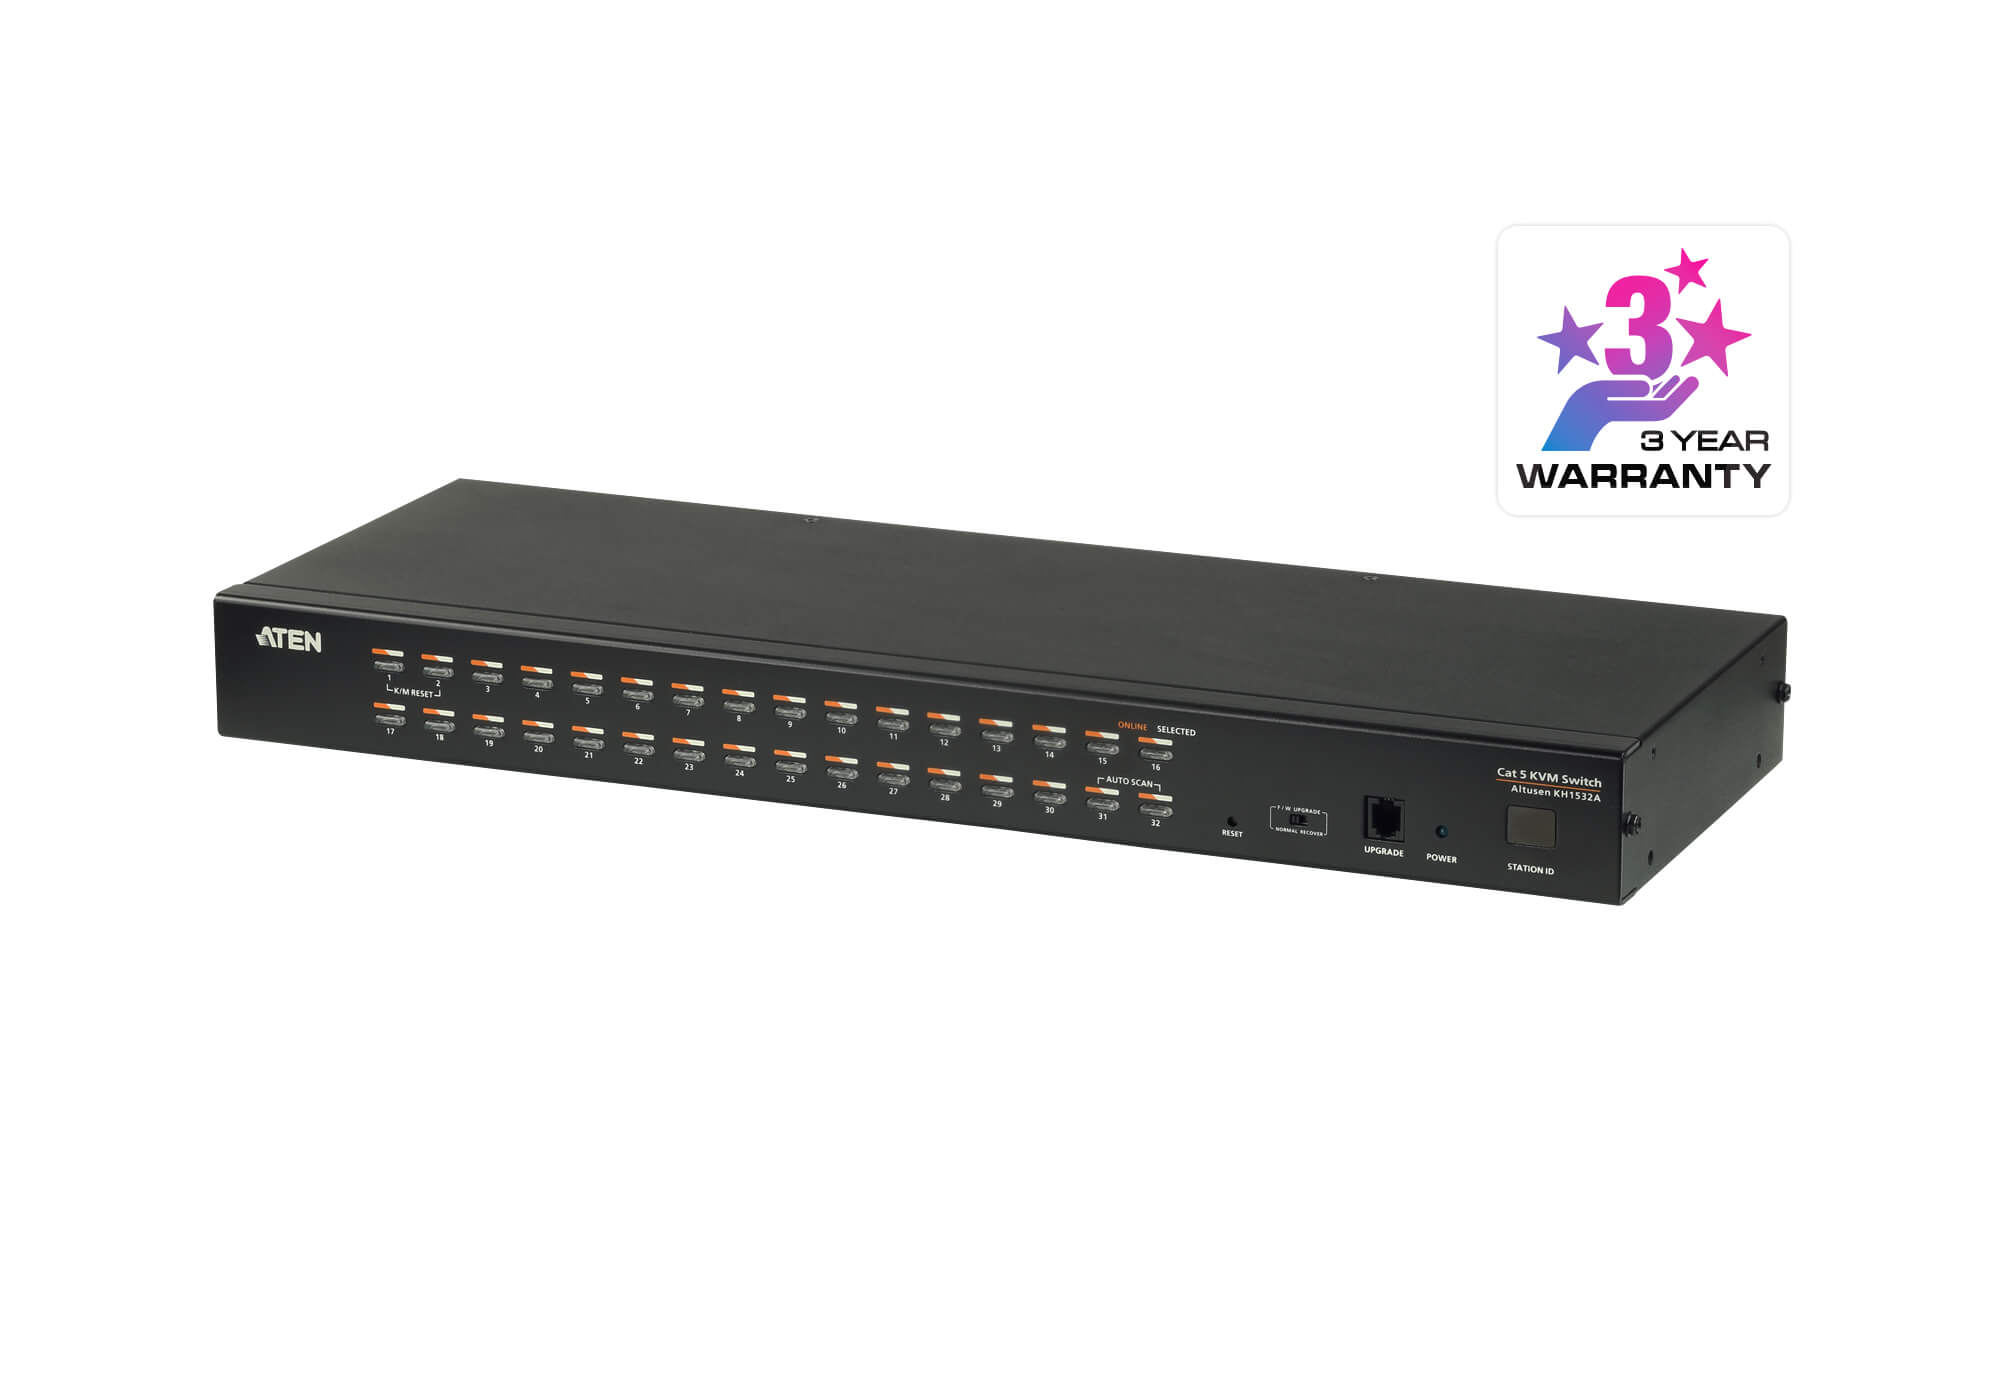 Aten, Rackmount, KVM, Switch, 1, Console, 32, Port, Multi-Interface, Cat, 5, KVM, Cables, NOT, Included, Daisy, Chainable, for, up, to, 10, 